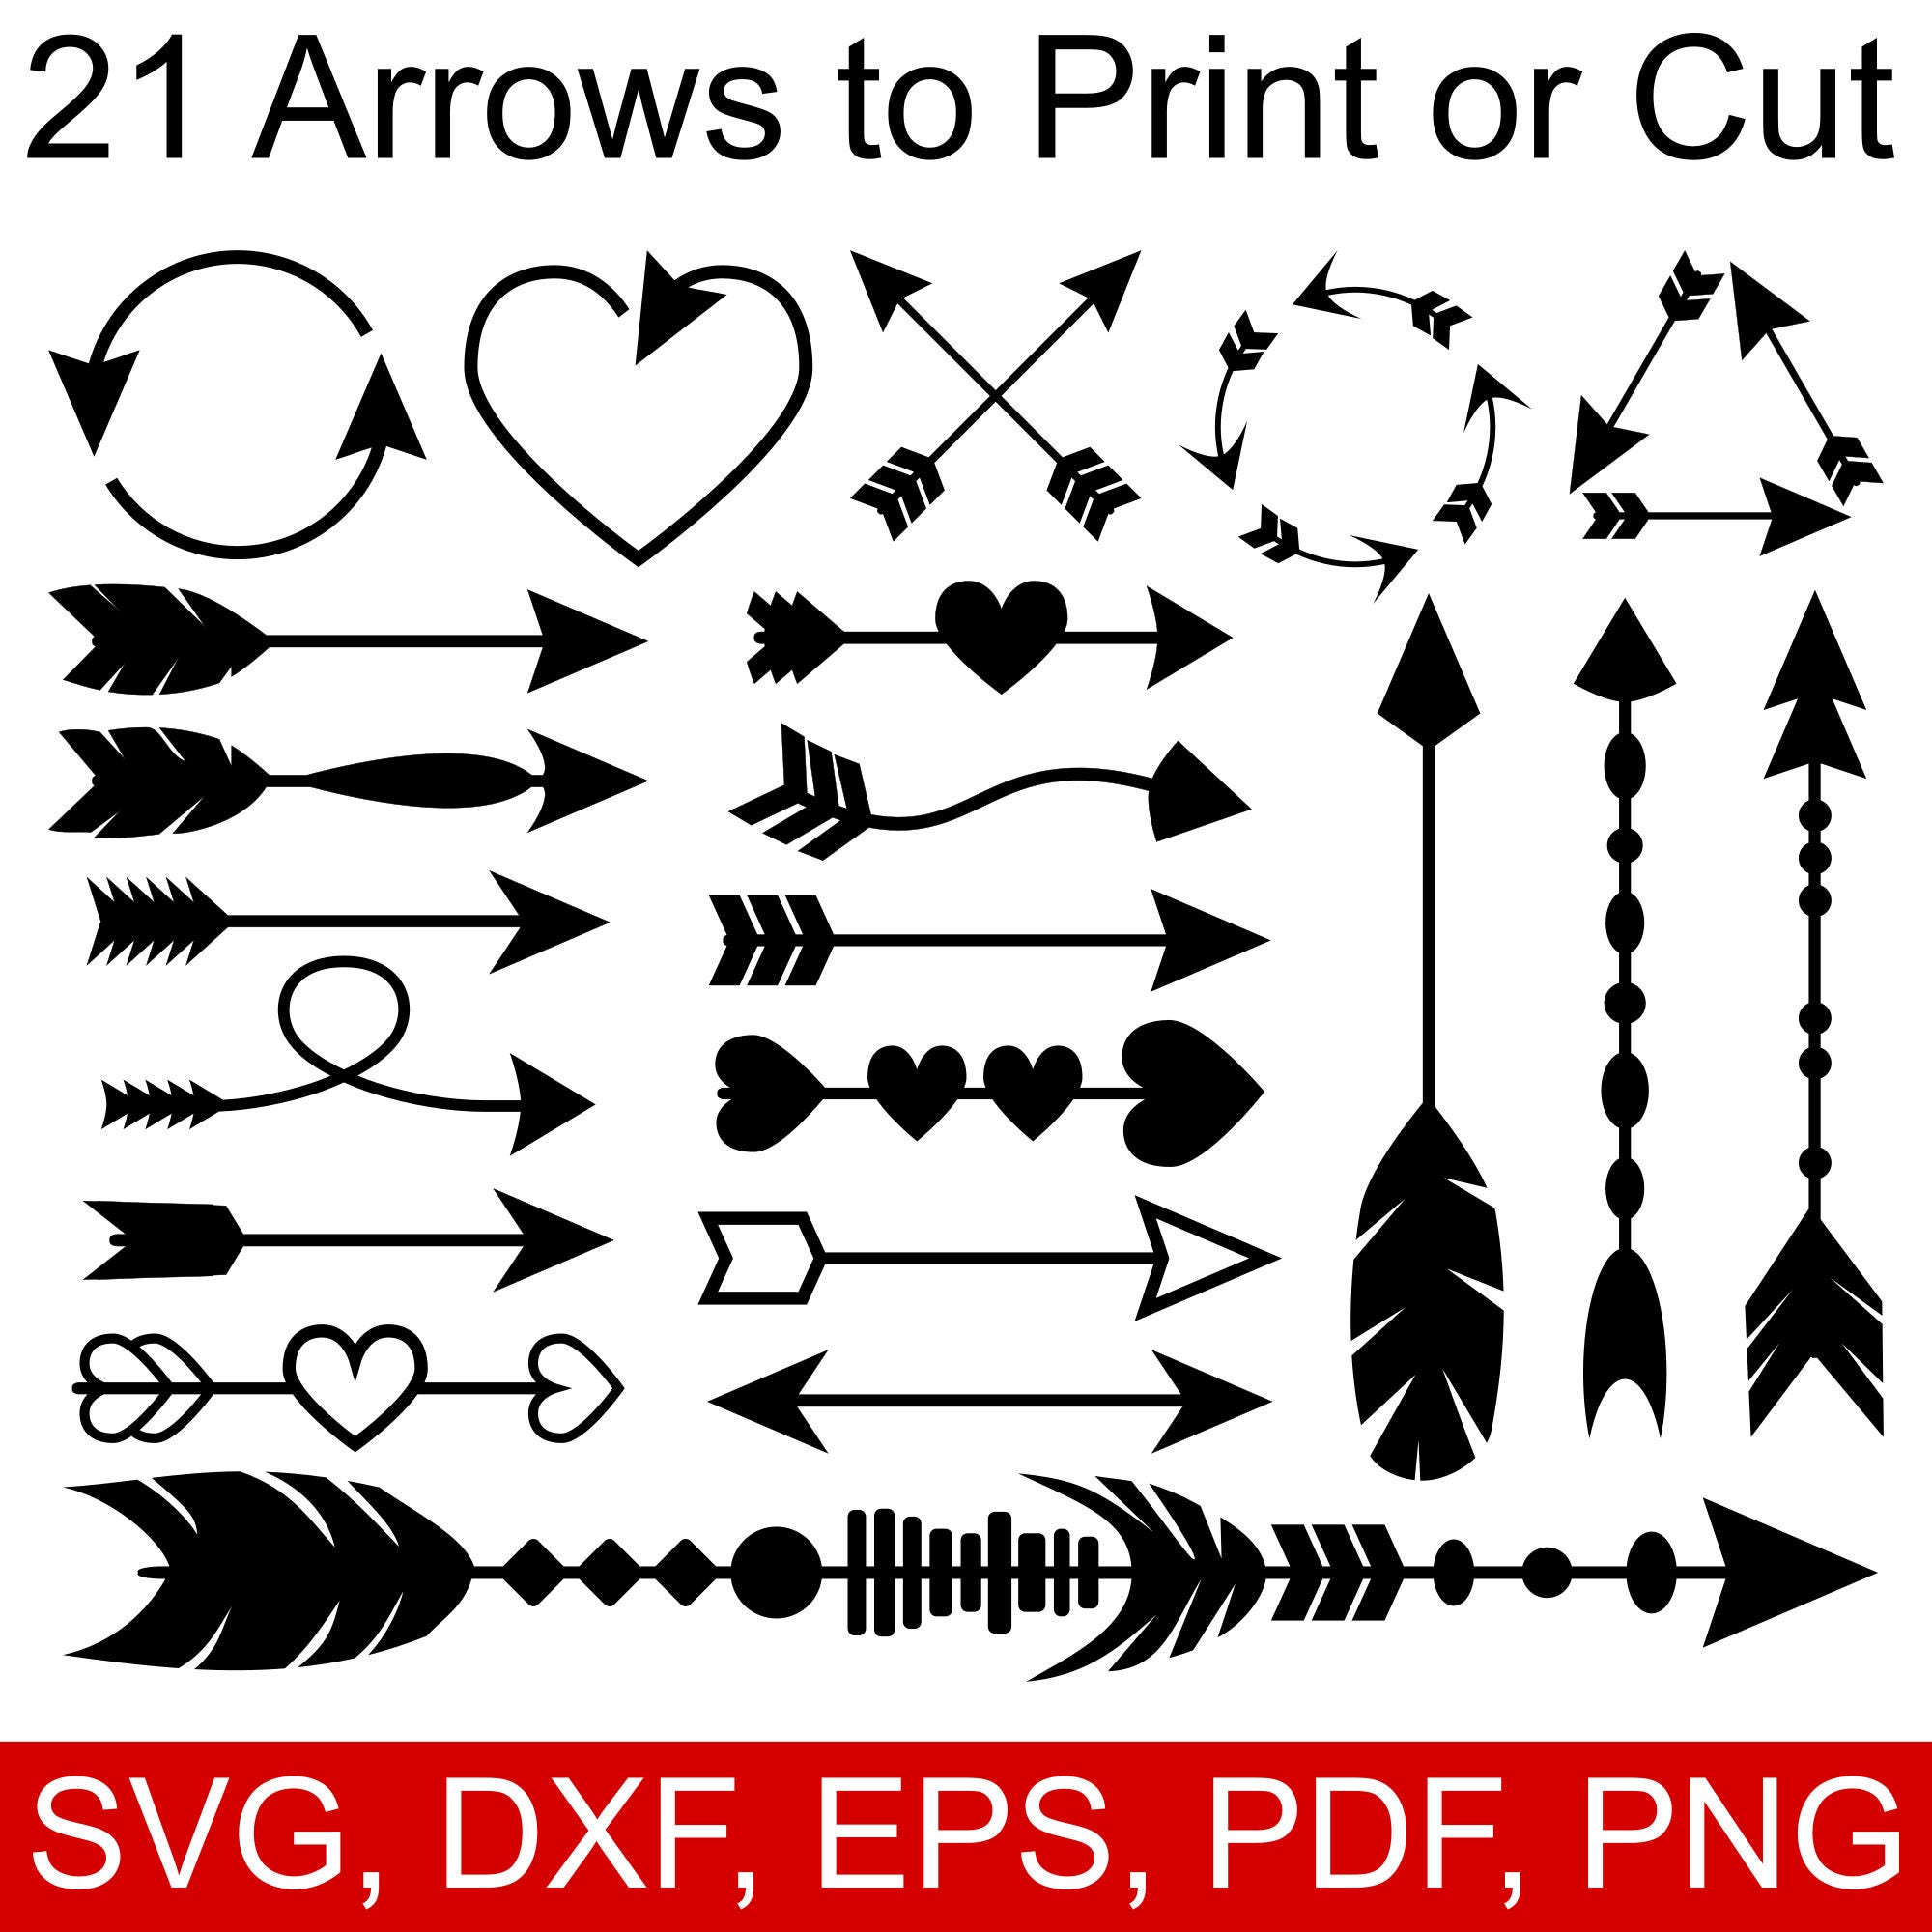 Download Arrows SVG Bundle with 21 Arrow SVG files and printable ...